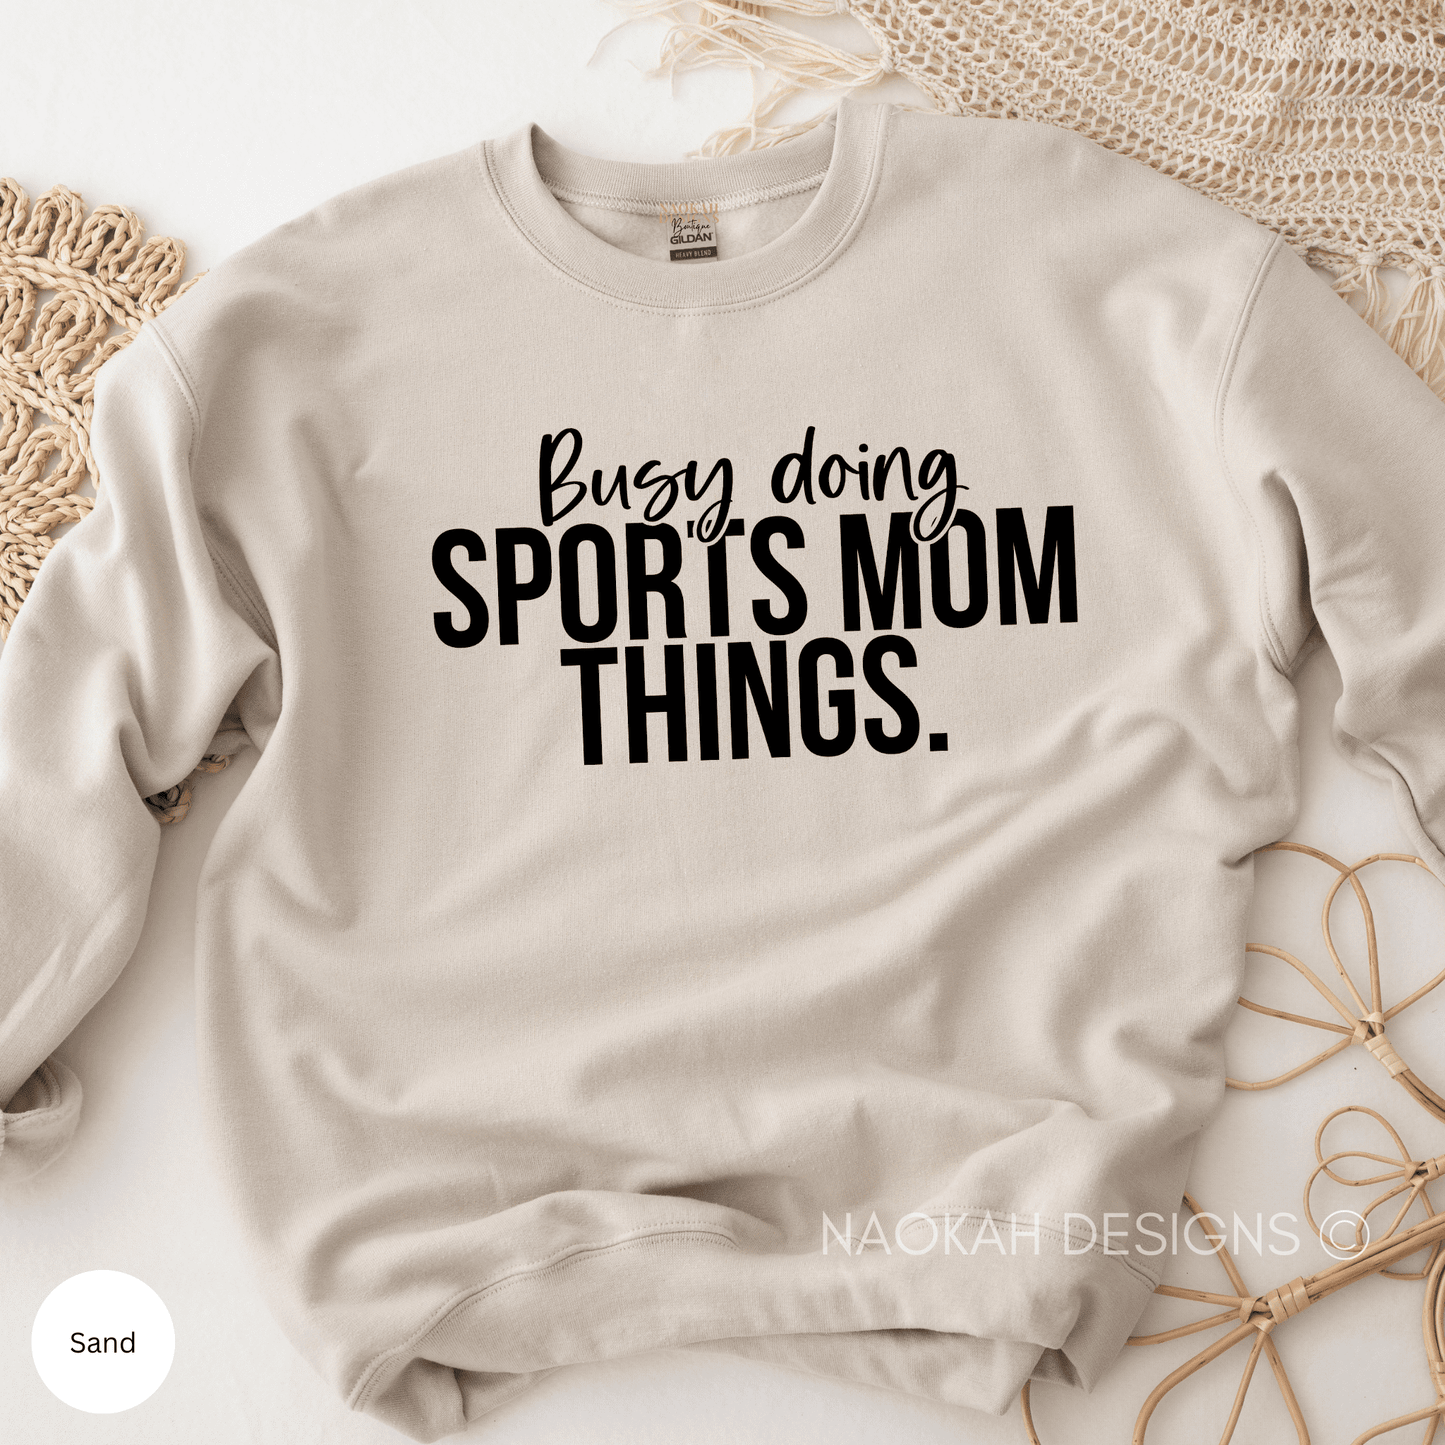 busy doing sports mom things sweater, gift for mom, sports mom shirt, game day shirts, mom life sweater, hockey mom sweater, football mom sweater, lacrosse mom sweater